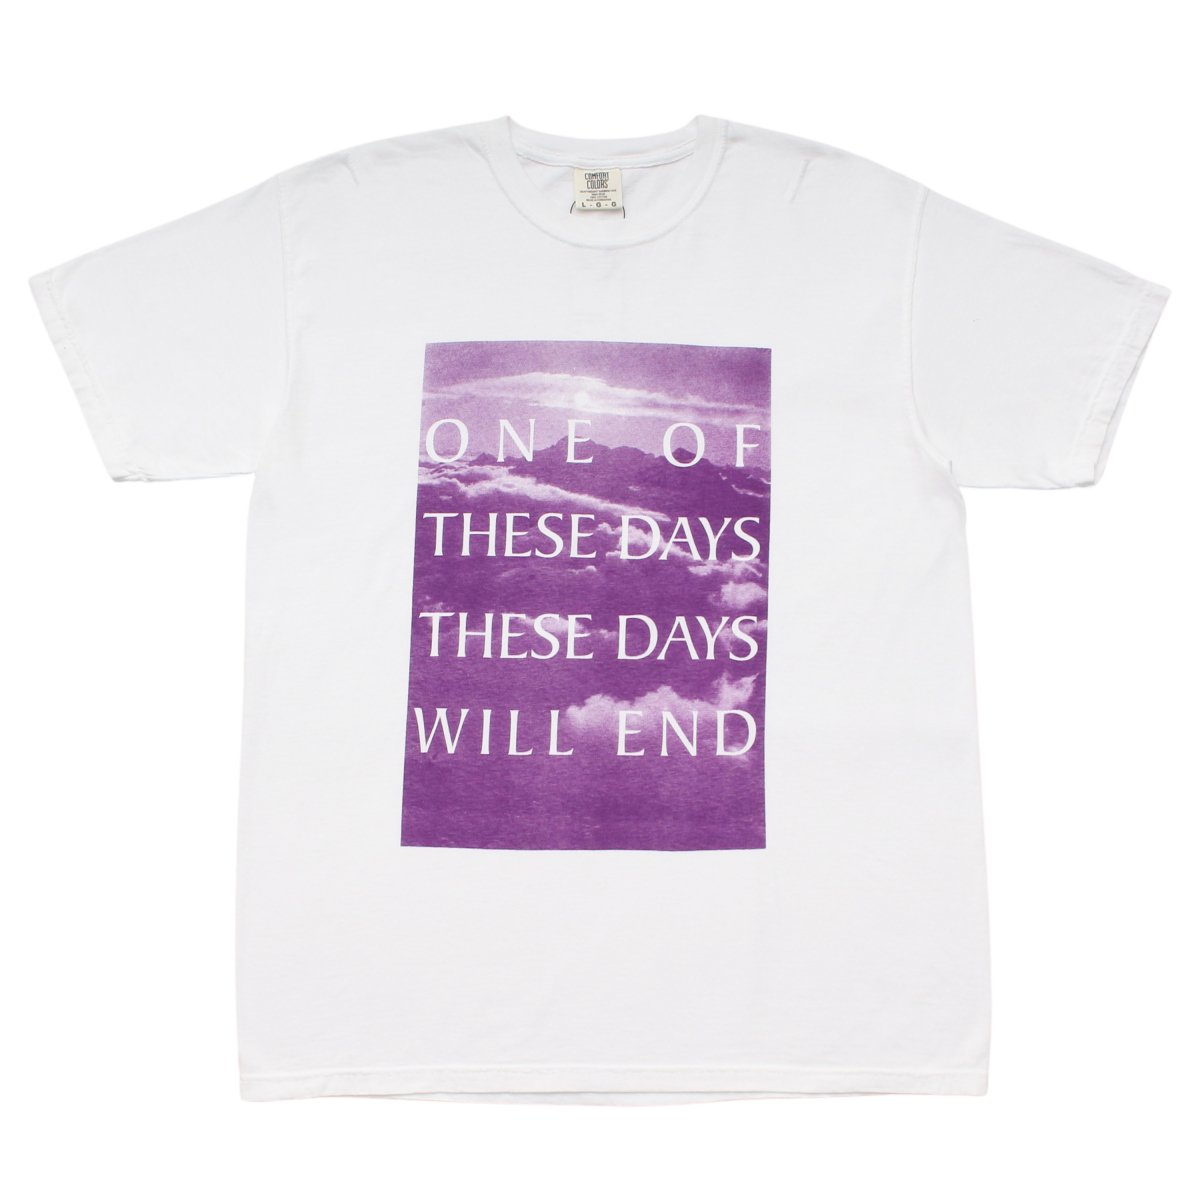 One of These Days shirt